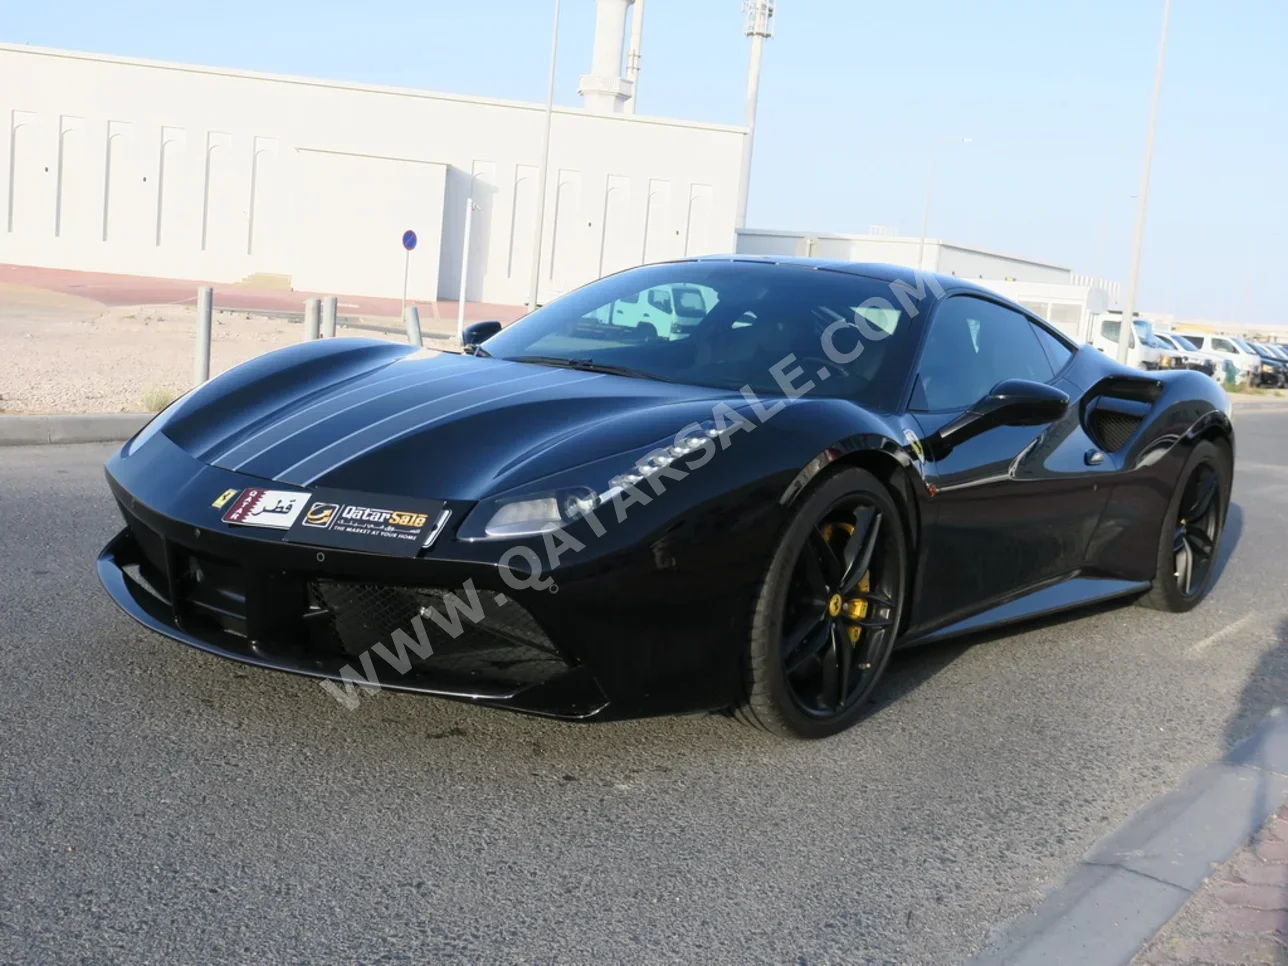 Ferrari  488  GTB  2017  Automatic  7,000 Km  8 Cylinder  Front Wheel Drive (FWD)  Coupe / Sport  Black  With Warranty